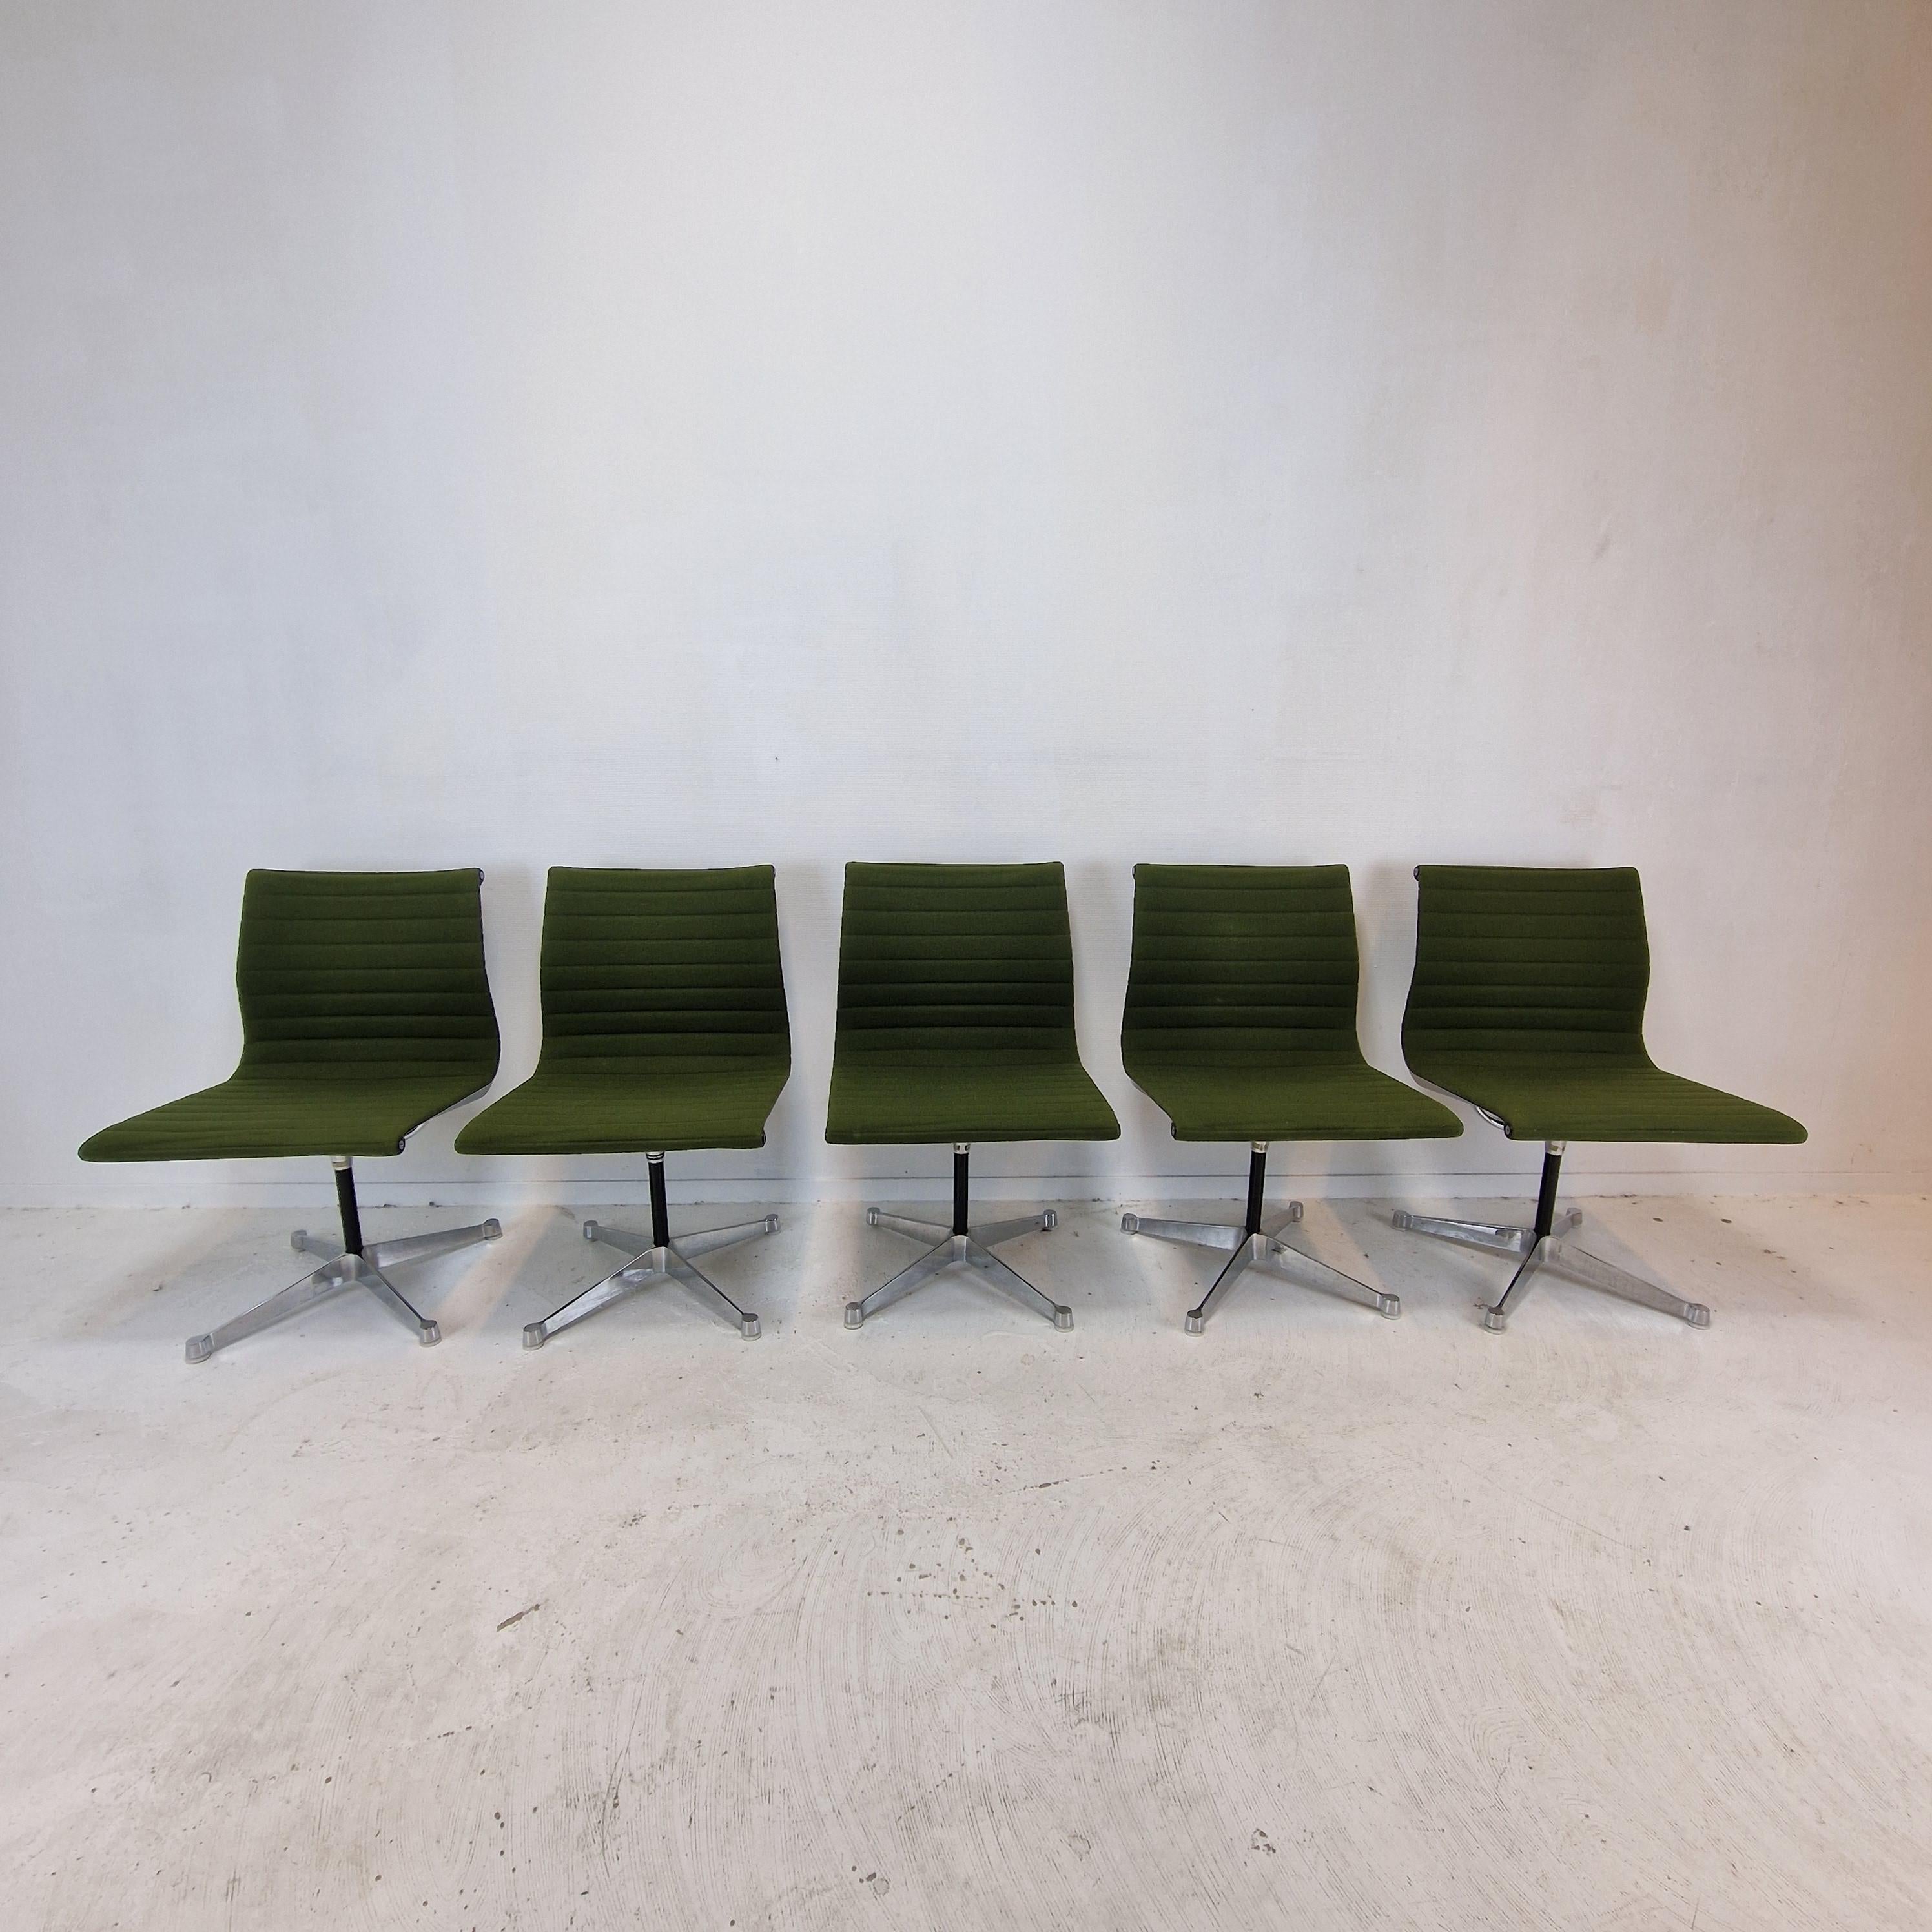 Very nice set of 5 original EA105 Chairs.
These swivel chairs are designed by Charles and Ray Eames and fabricated by Herman Miller in the 70's.

They have the original green 